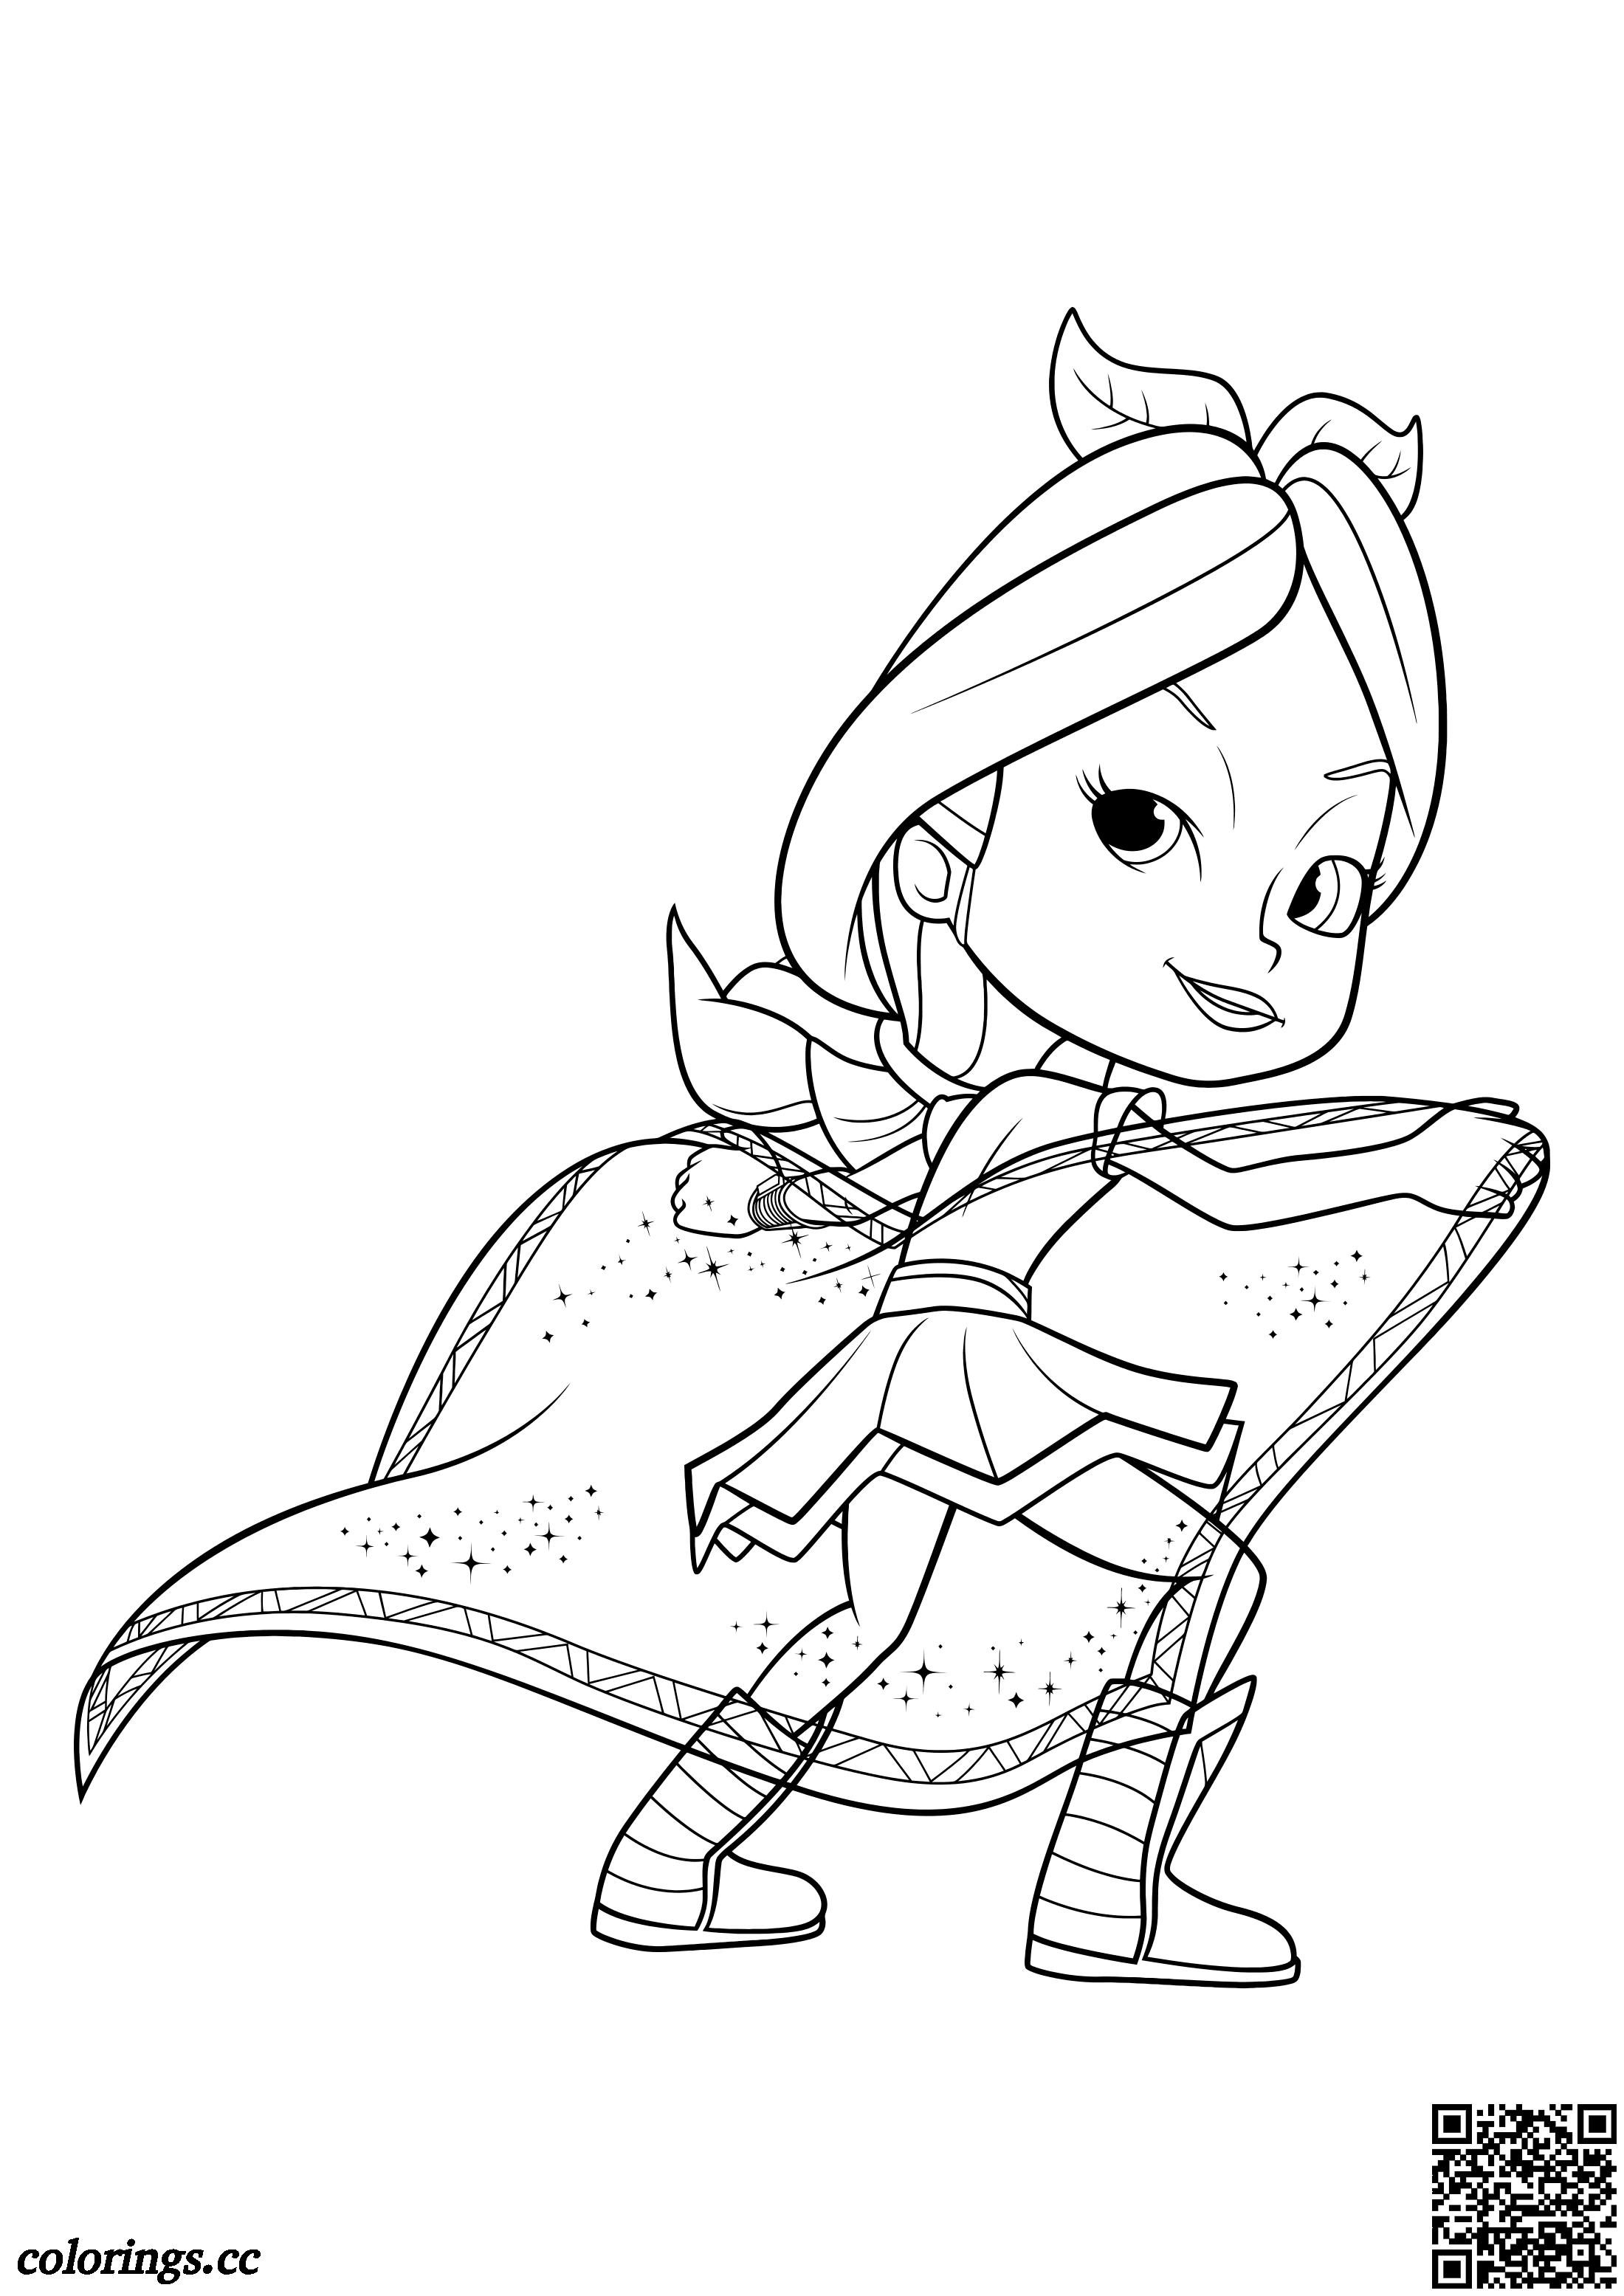 Pepper Mintz coloring pages, Rainbow Rangers coloring pages - Colorings.cc